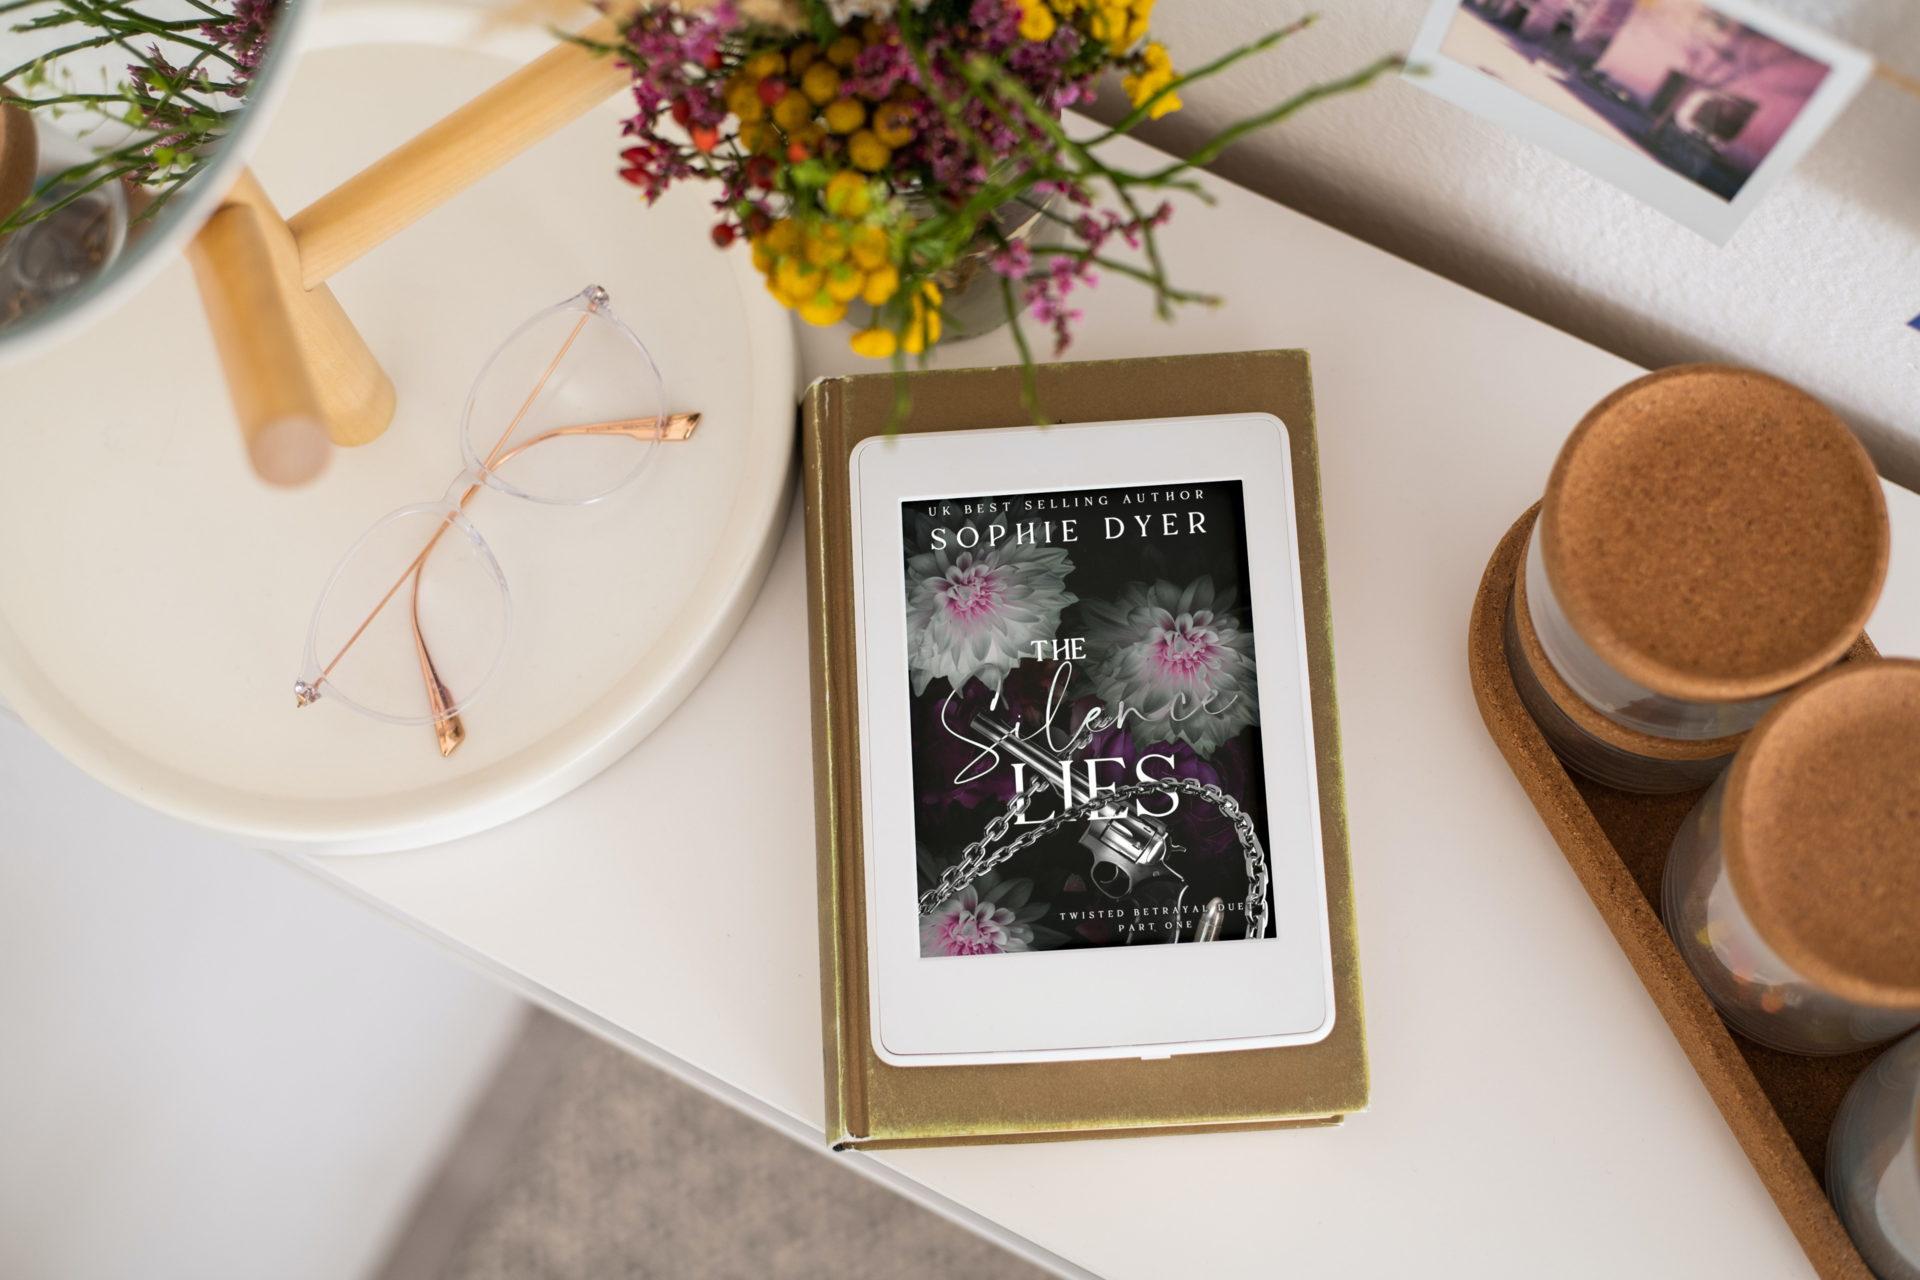 Interview with Sophie Dyer author of The Silence Lies